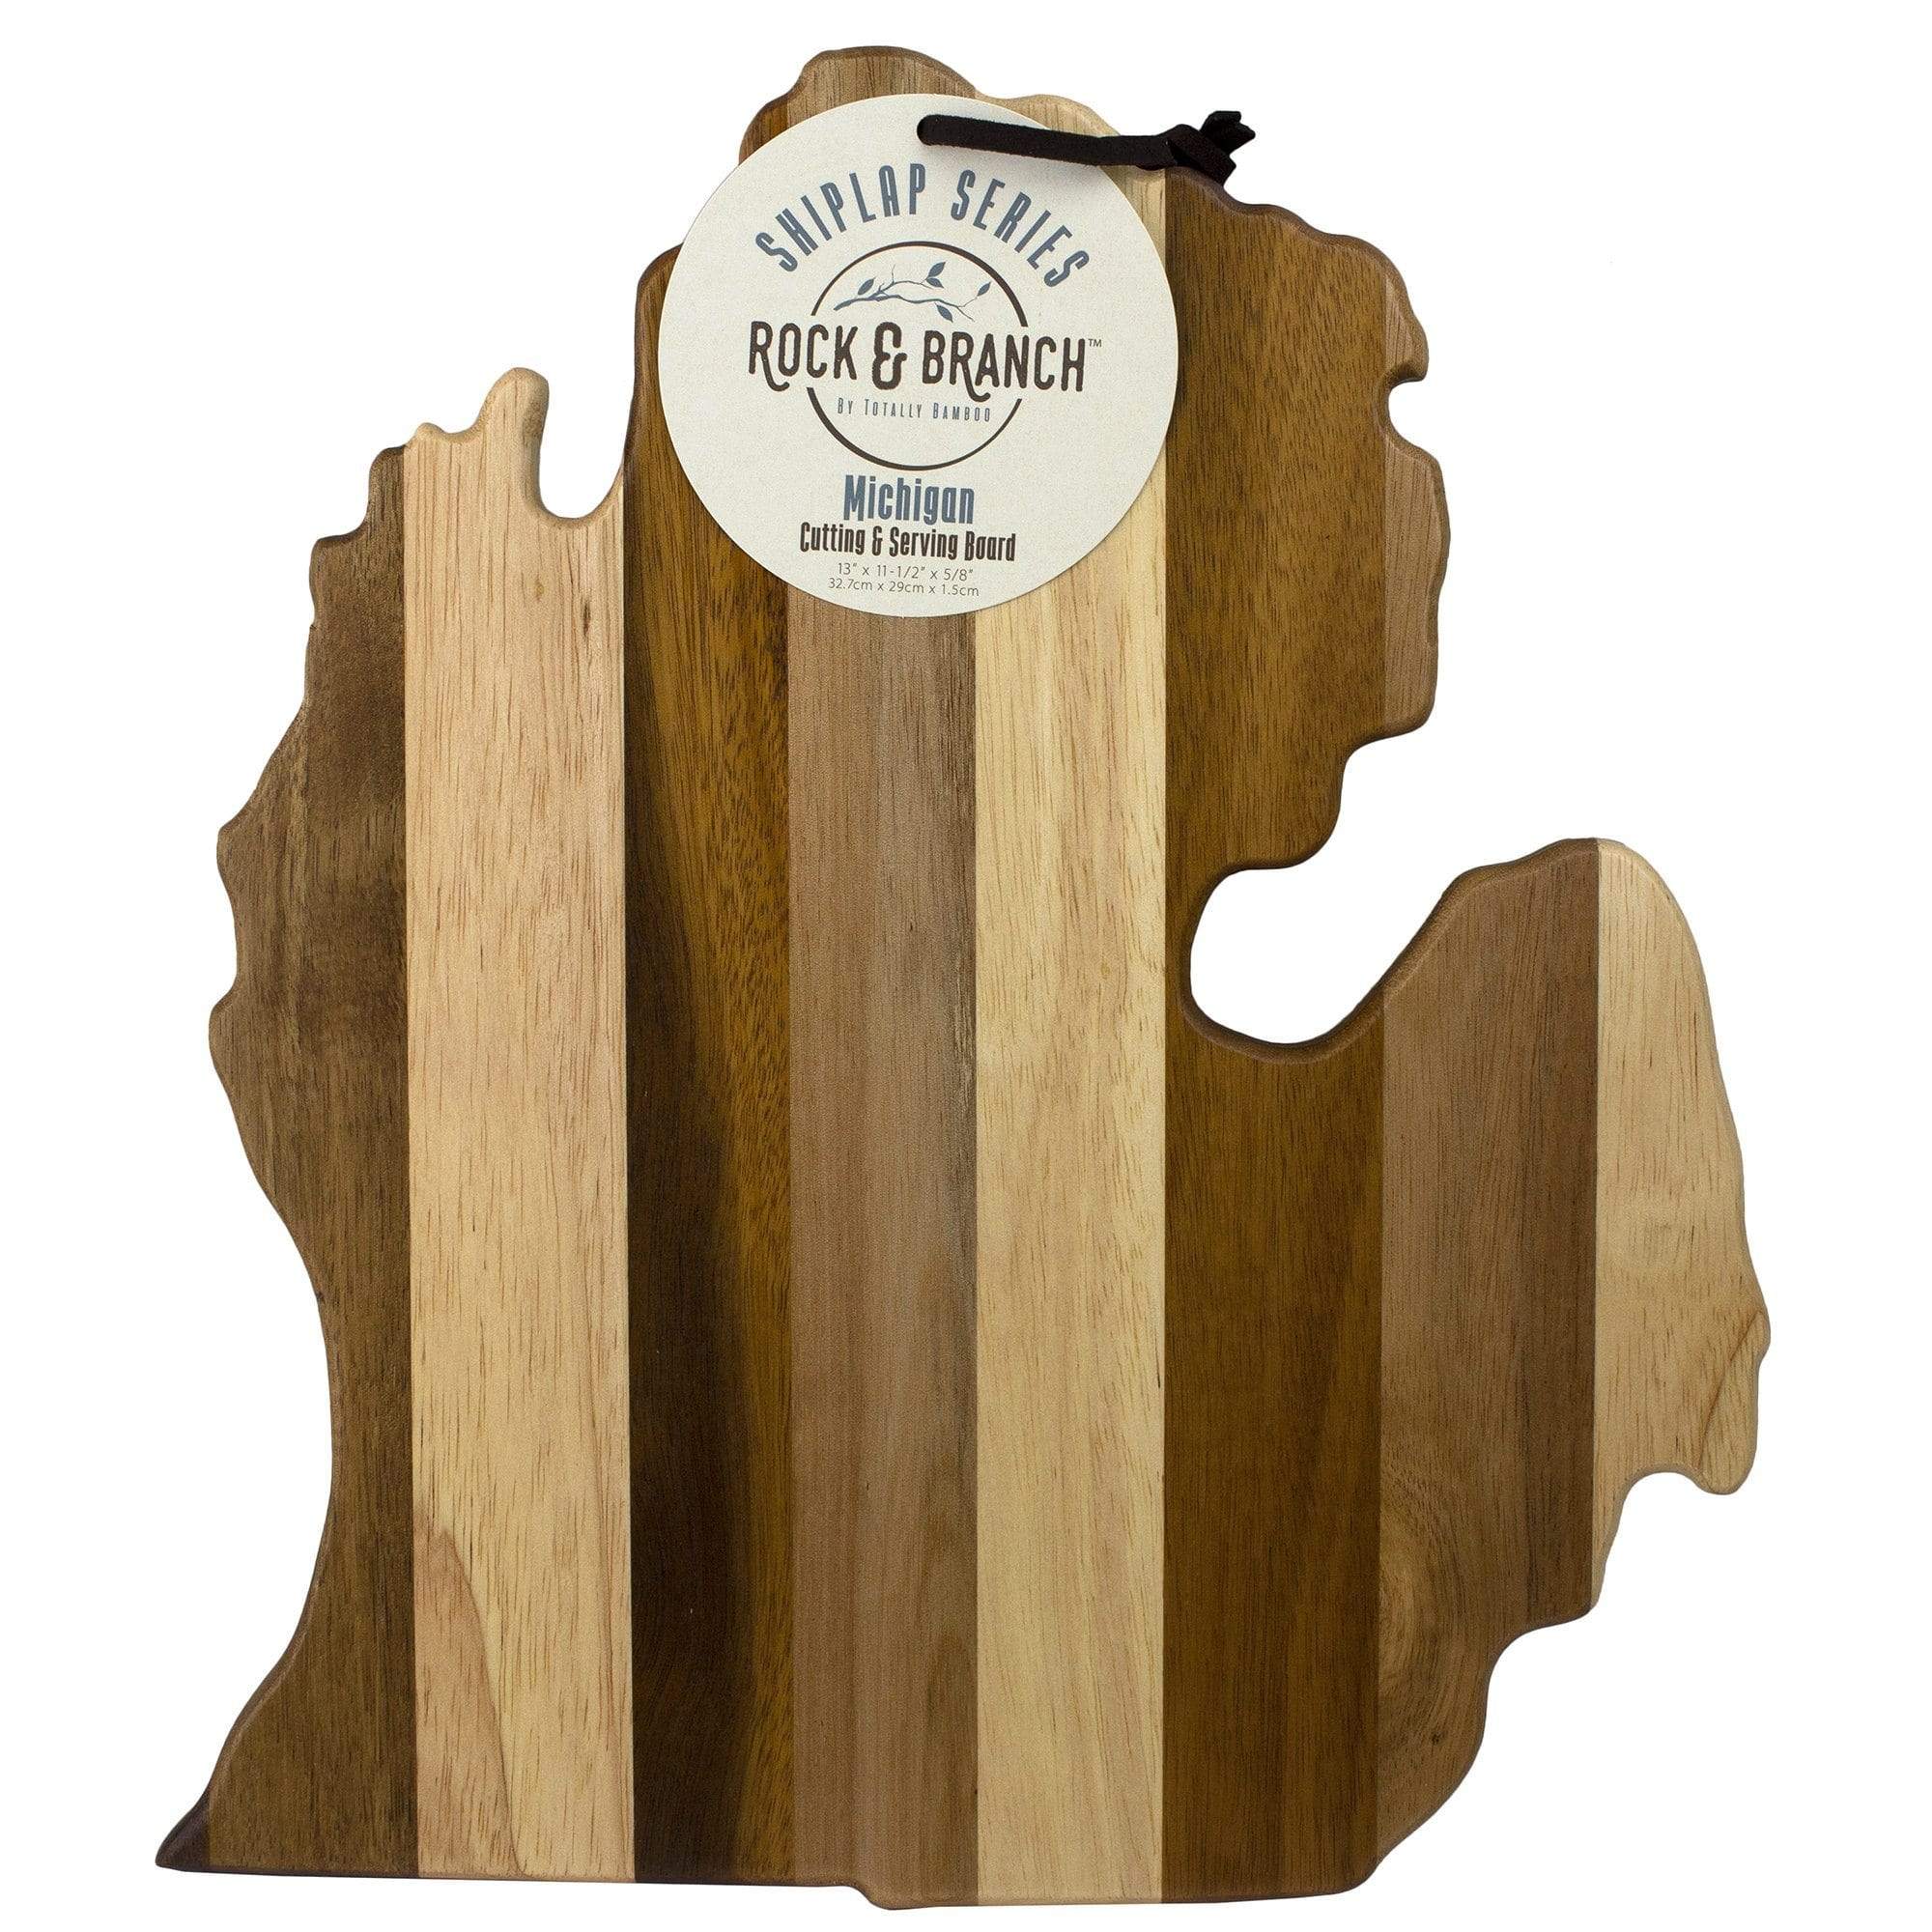 Totally Bamboo Rock & Branch® Shiplap Series Michigan State Shaped Wood Serving and Cutting Board